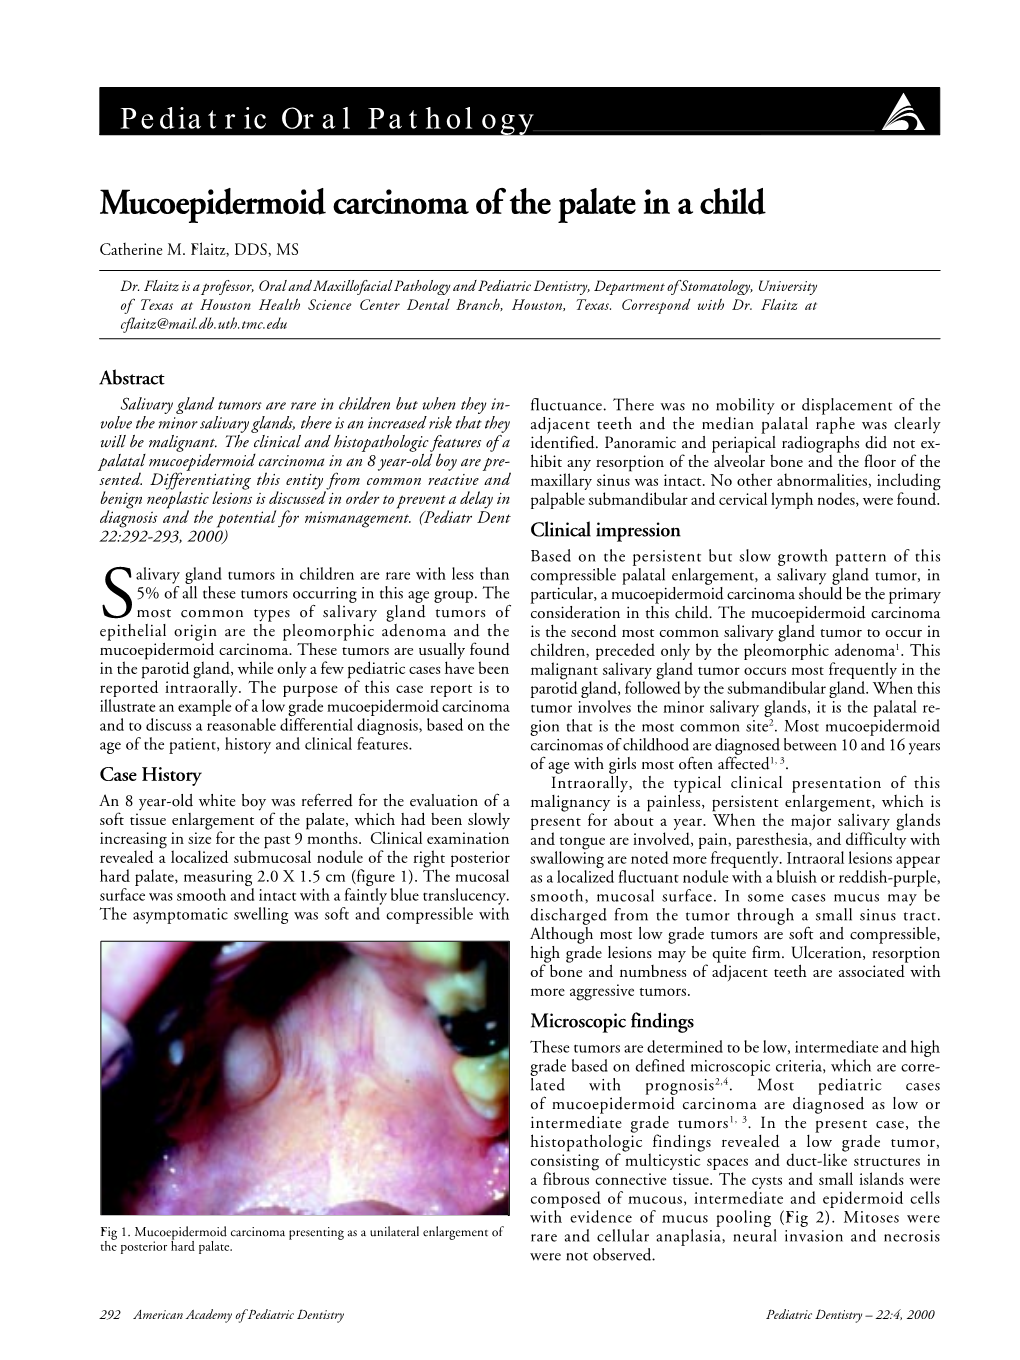 Mucoepidermoid Carcinoma of the Palate in a Child